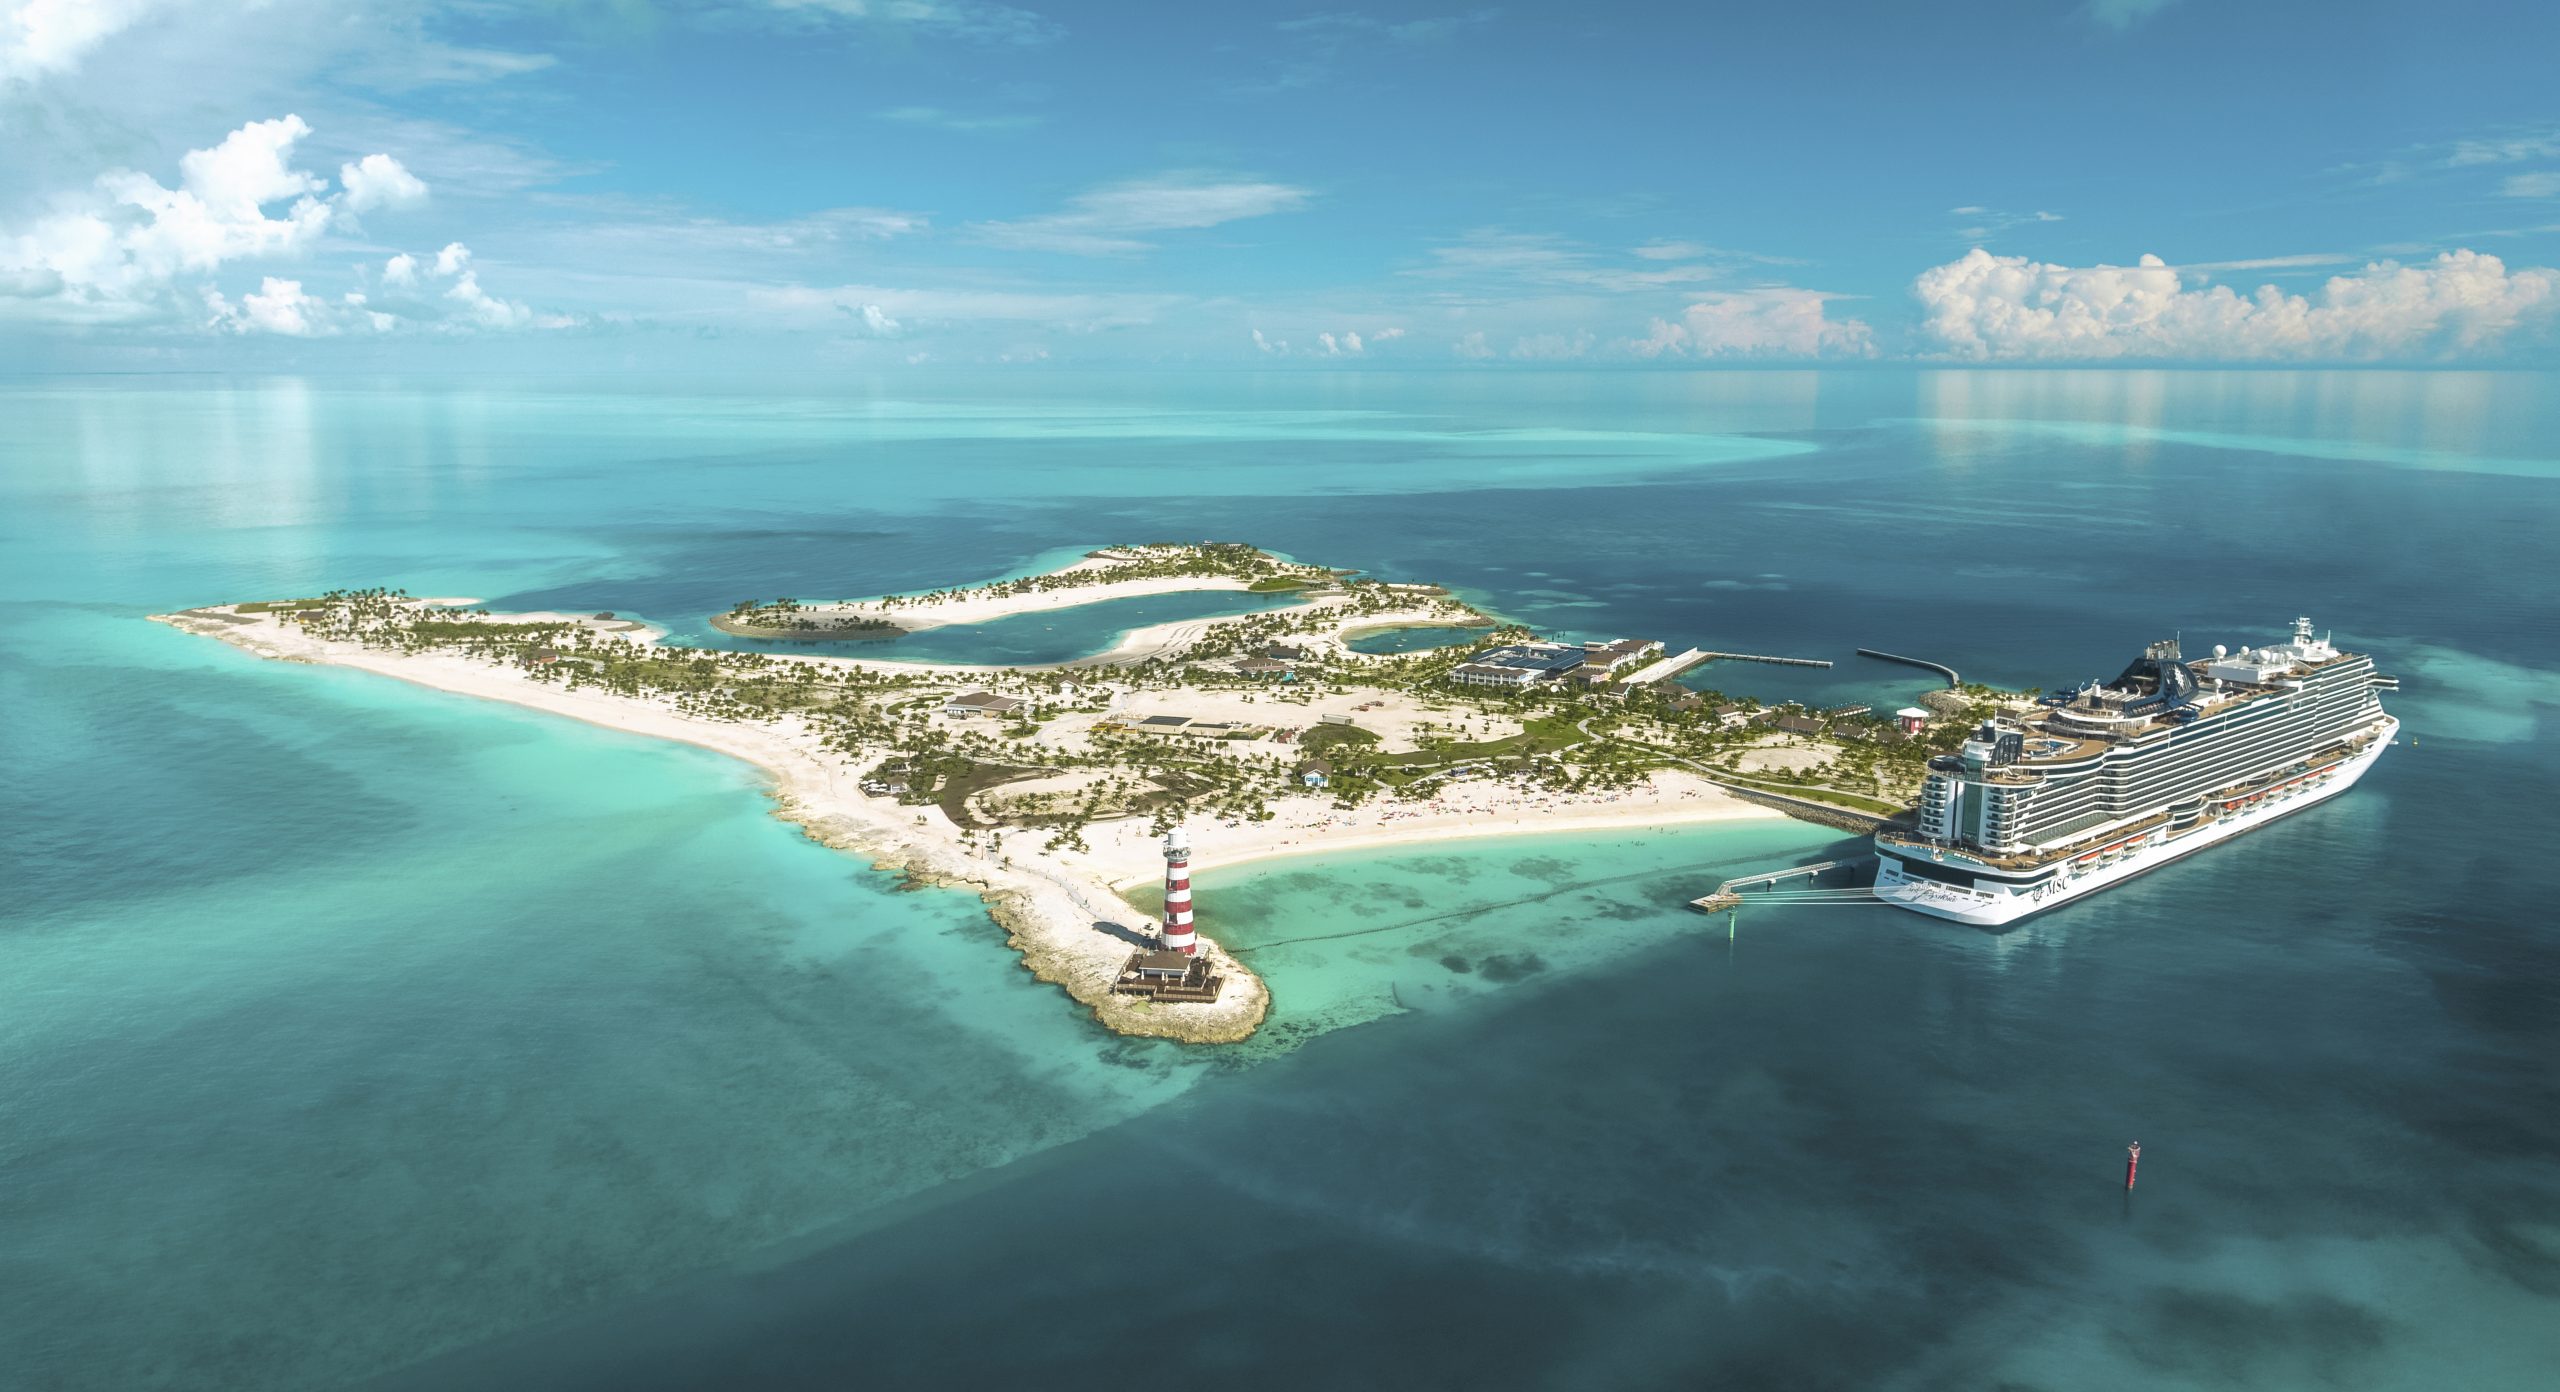 10 Essential Things to Know Before Visiting MSC’s Ocean Cay